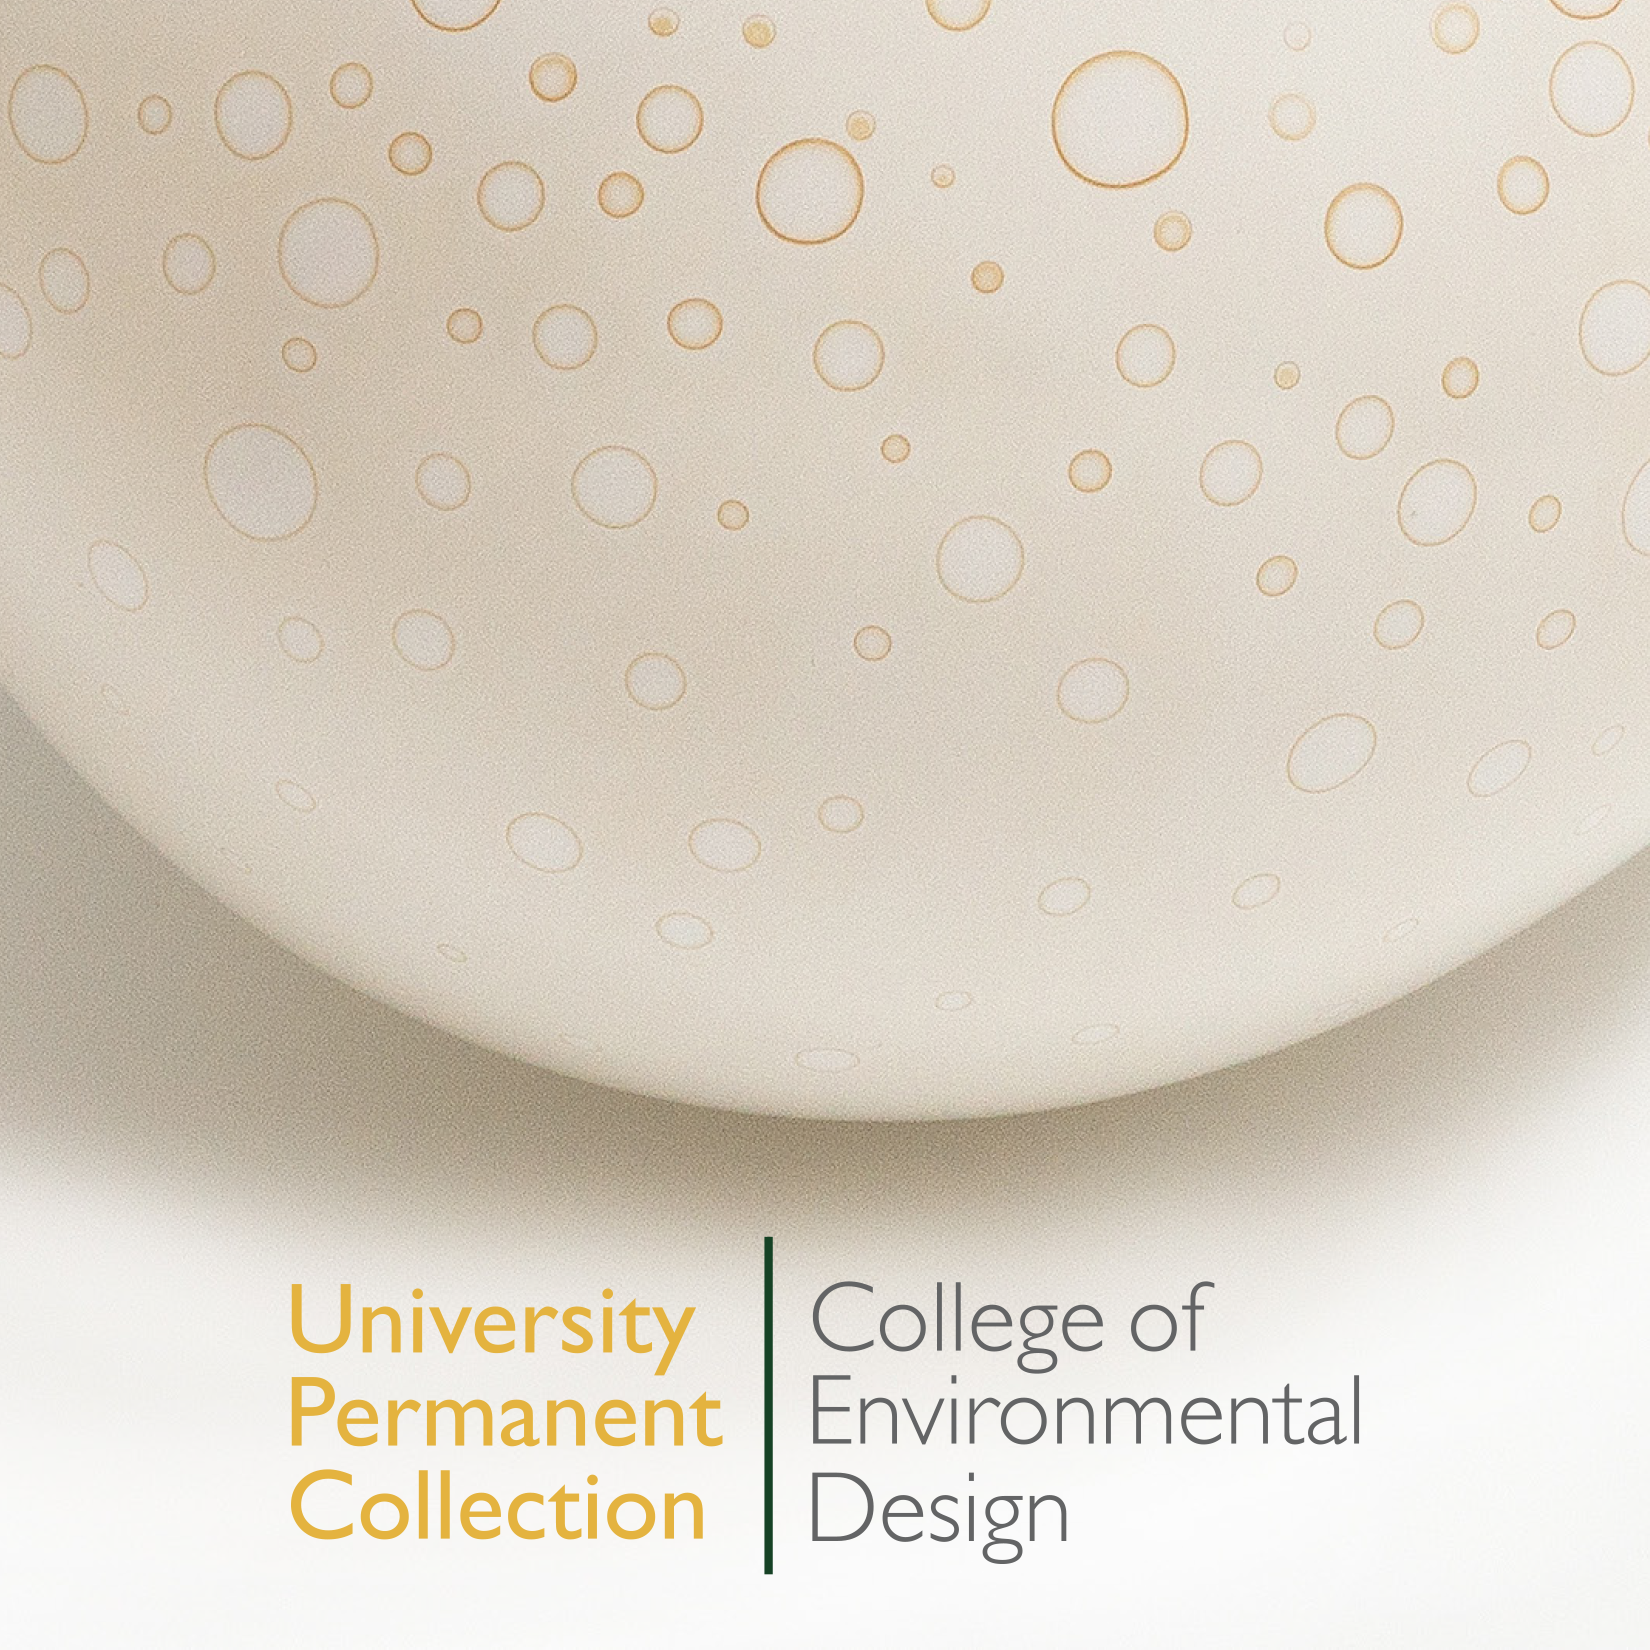 University Permanent Collection, College of Environmental Design